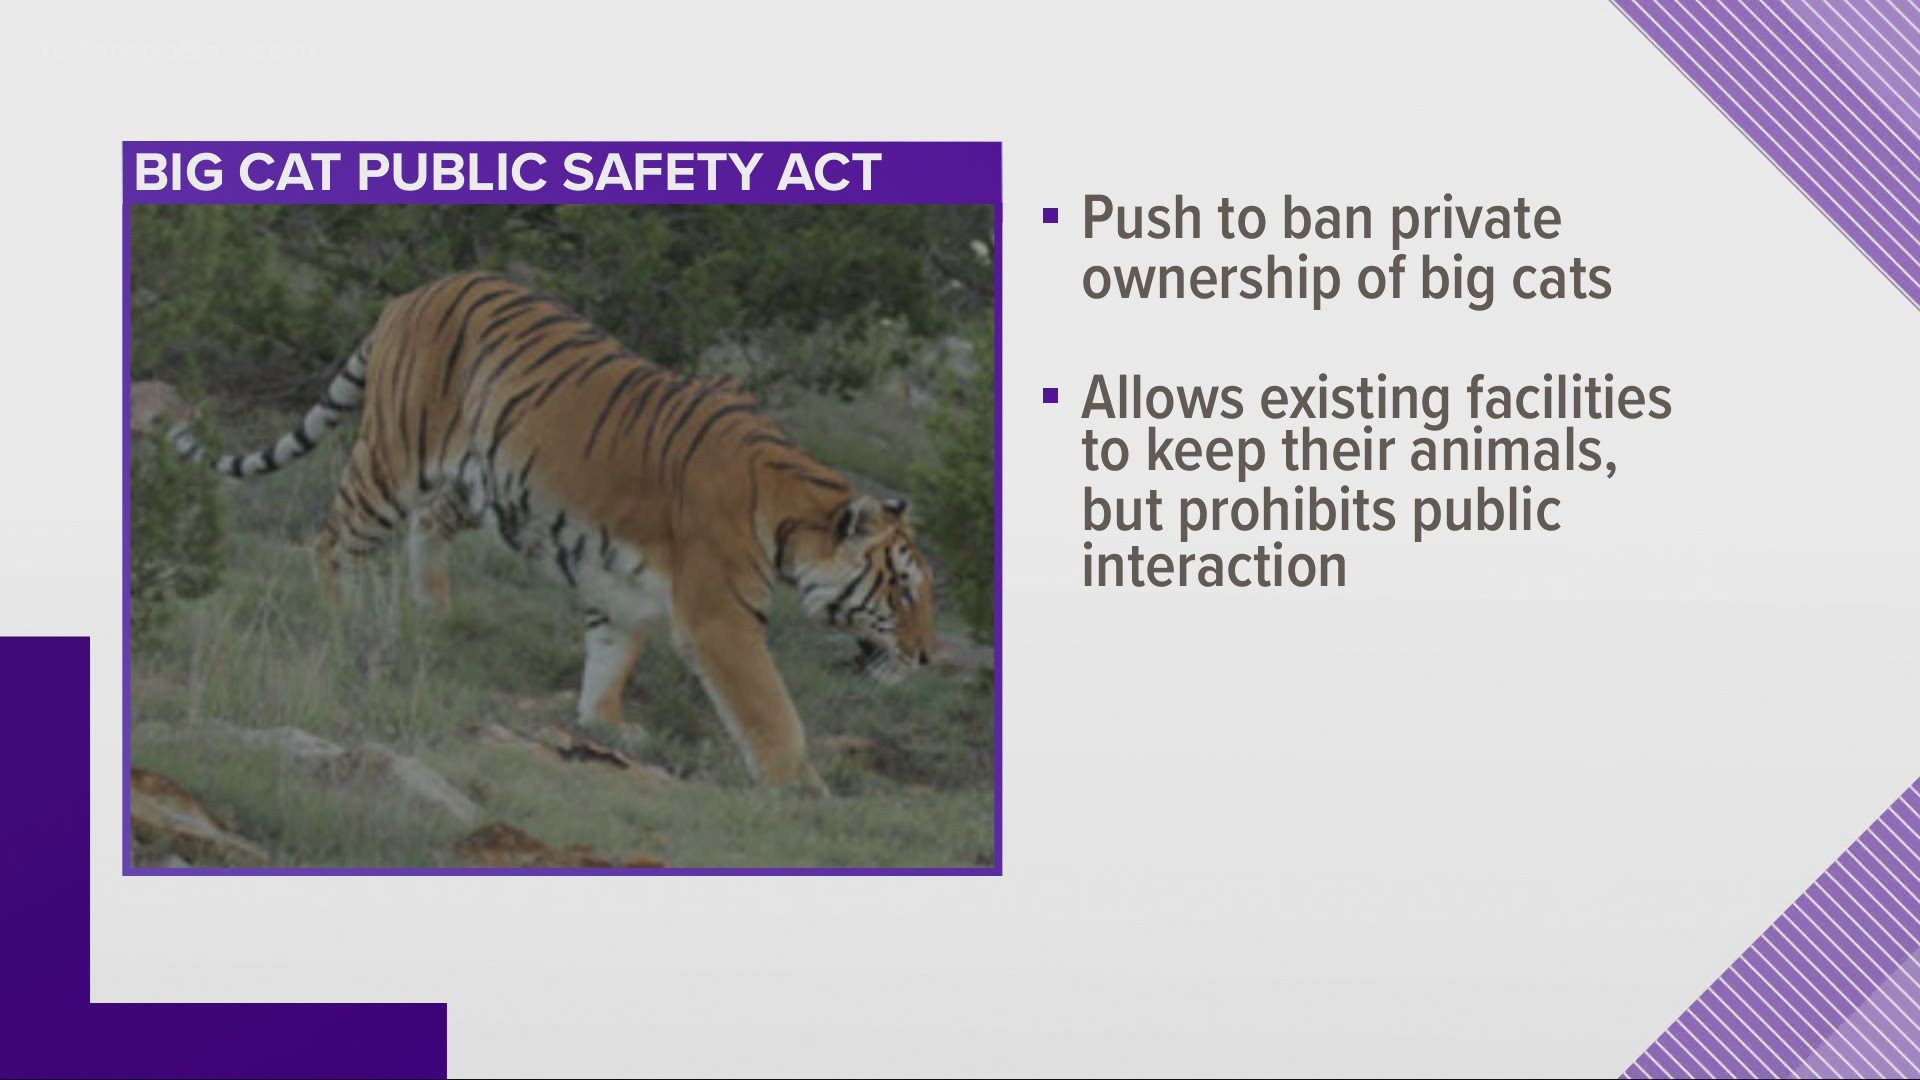 Big Cat Rescue's Carole Baskin and her husband Howard have been lobbying for the bill's passage for years.